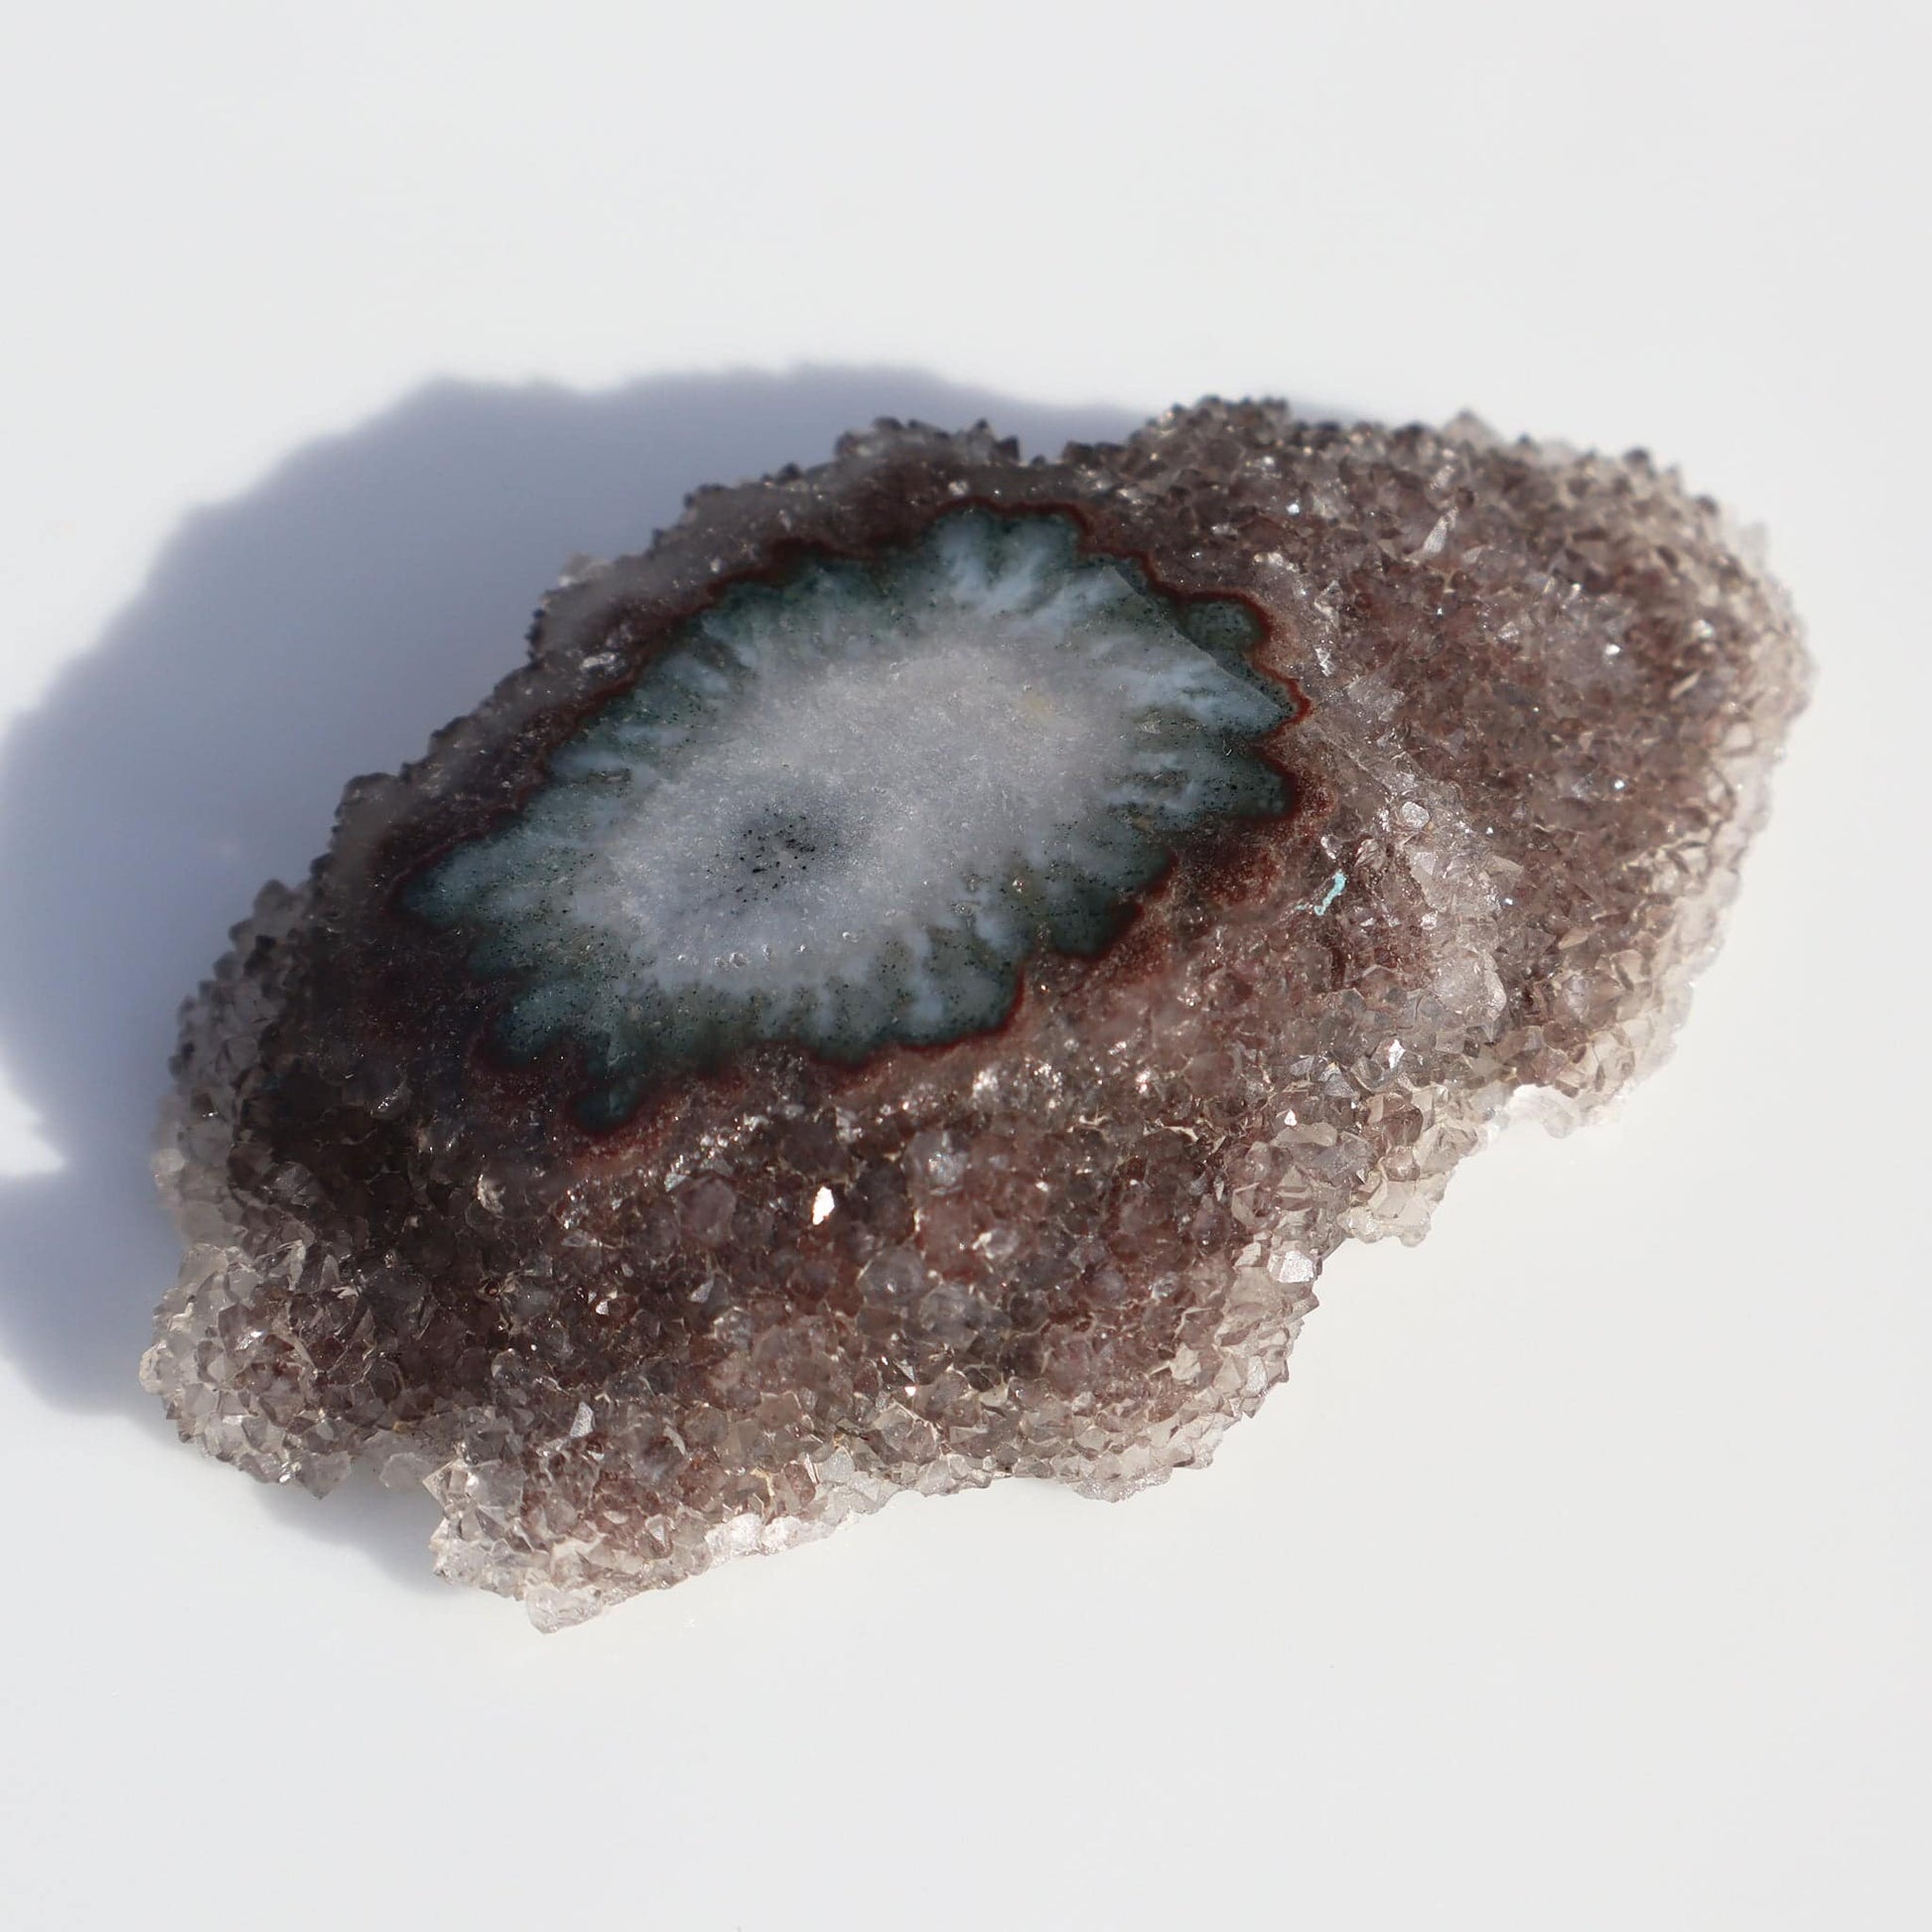 SEACRAB rare amethyst stalactite fragment from Uruguay, for sale - Deepest Earth